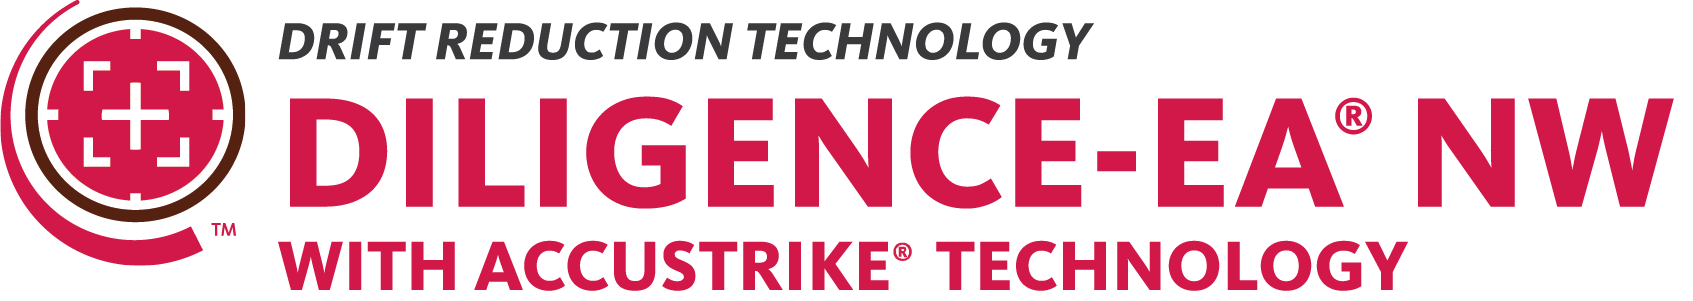 DILIGENCE-EA NW with ACCUSTRIKE TECHNOLOGY